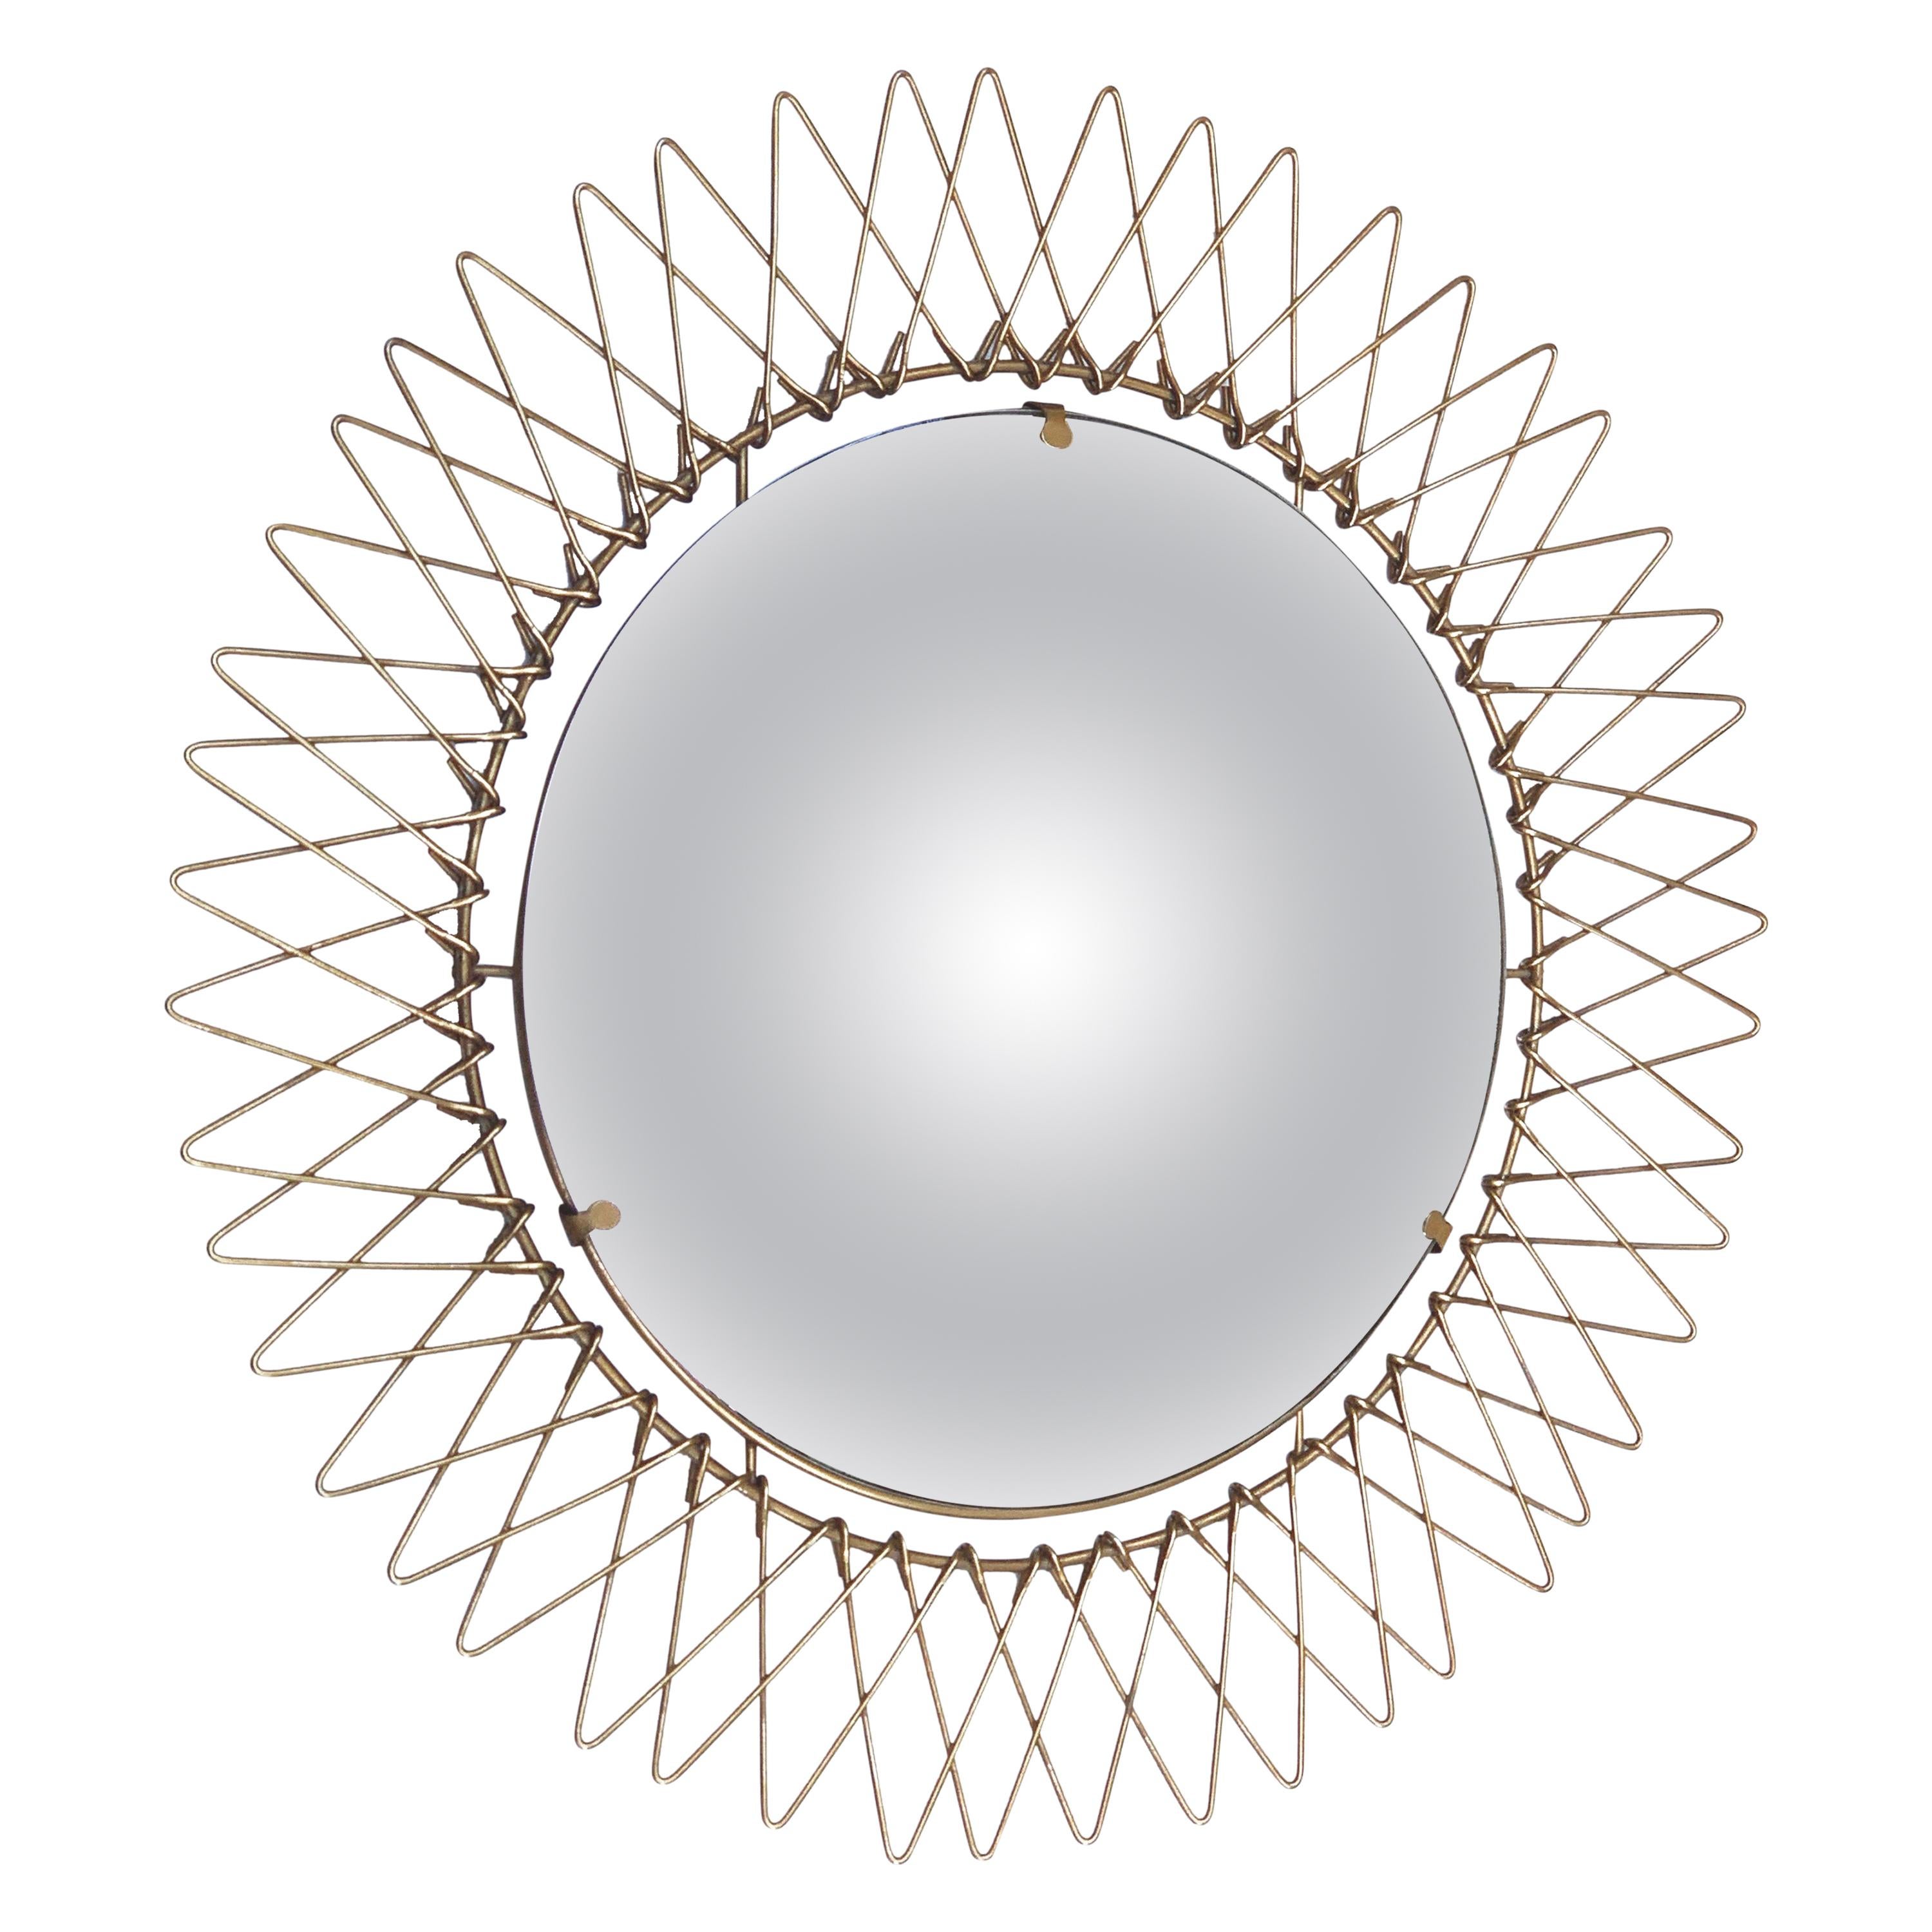 Midcentury Brass Round French Sunburst Adjustable Wall Mirror, Late 1970s For Sale